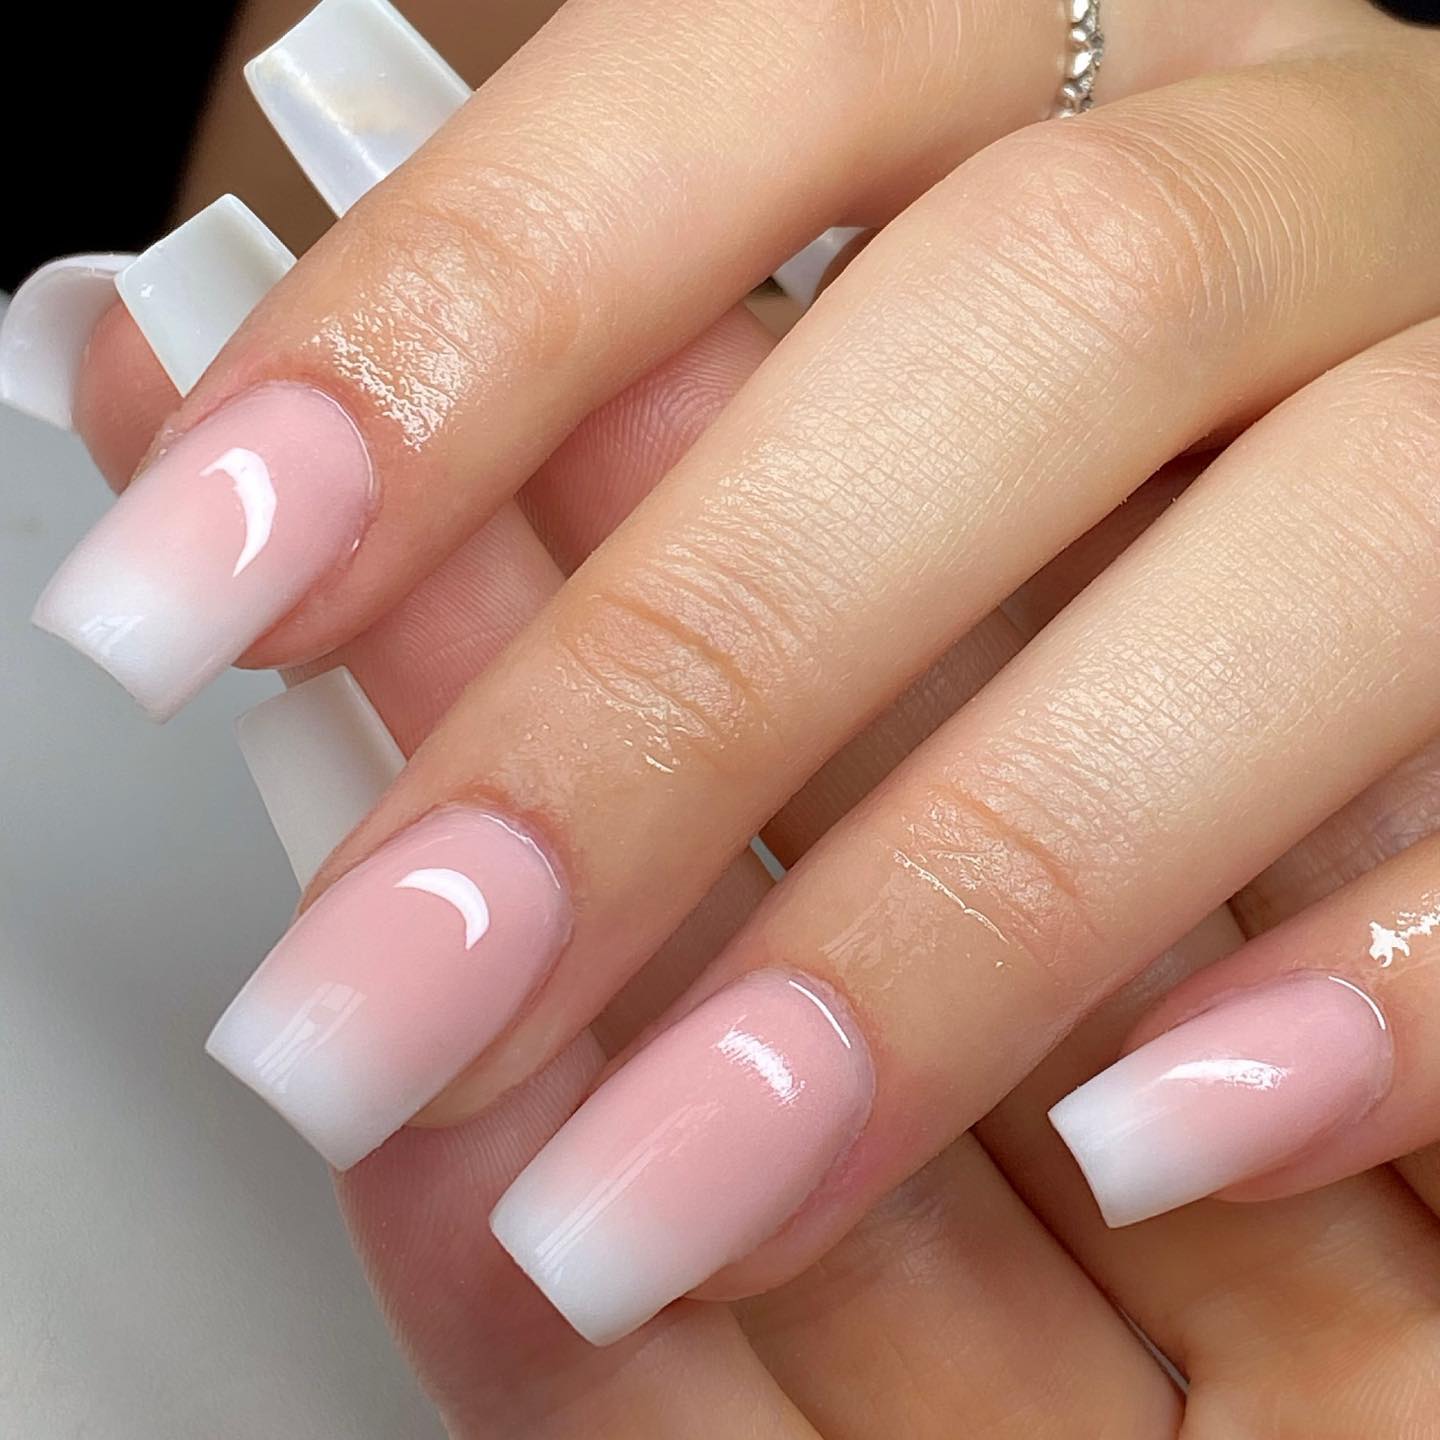 Looking simple and adorable at the same time is easy with these nails. What is different in this pink and white ombre nail is that the majority of it is pink and the white part seems like a French tip.